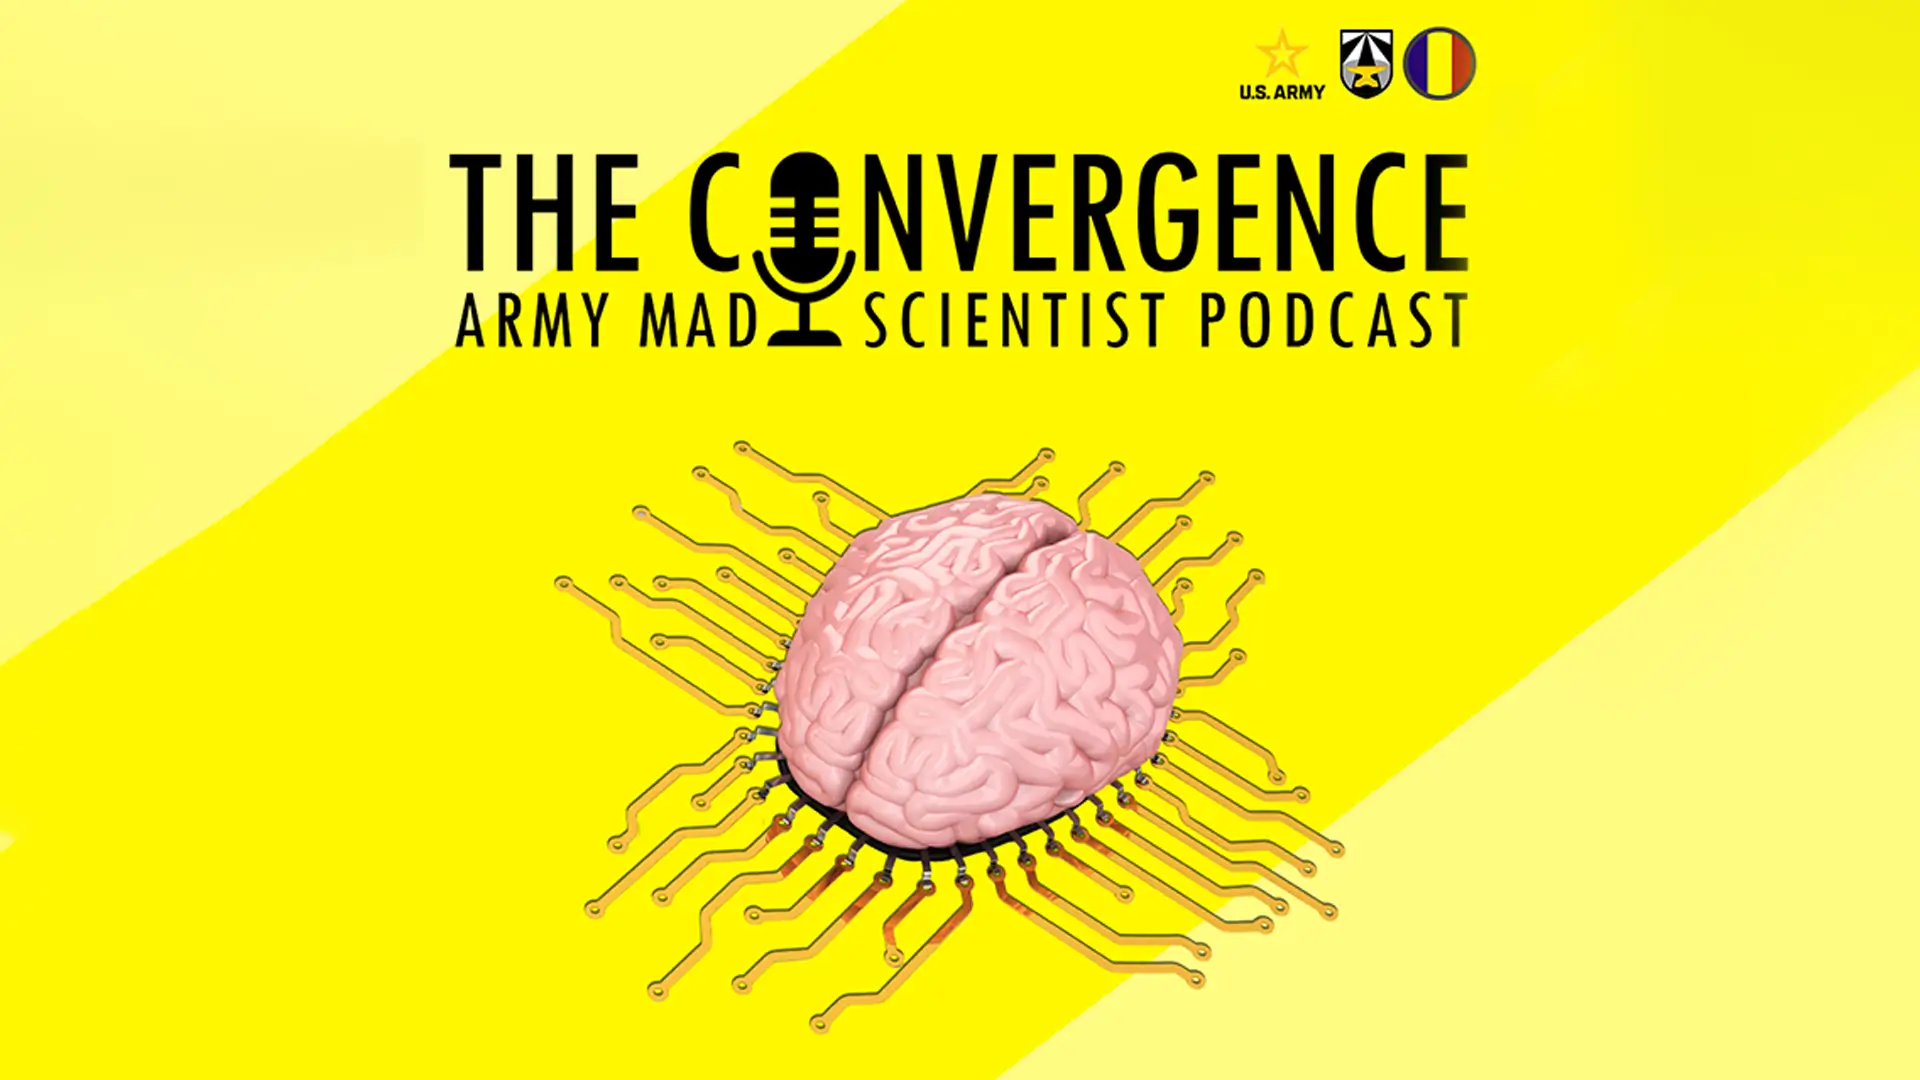 The Convergence podcast spoke with Dr. Keith Brawner, Program Manager, ICT and Dr. Bill Swartout, CTO, ICT about immersive technologies, simulation and artificial intelligence.